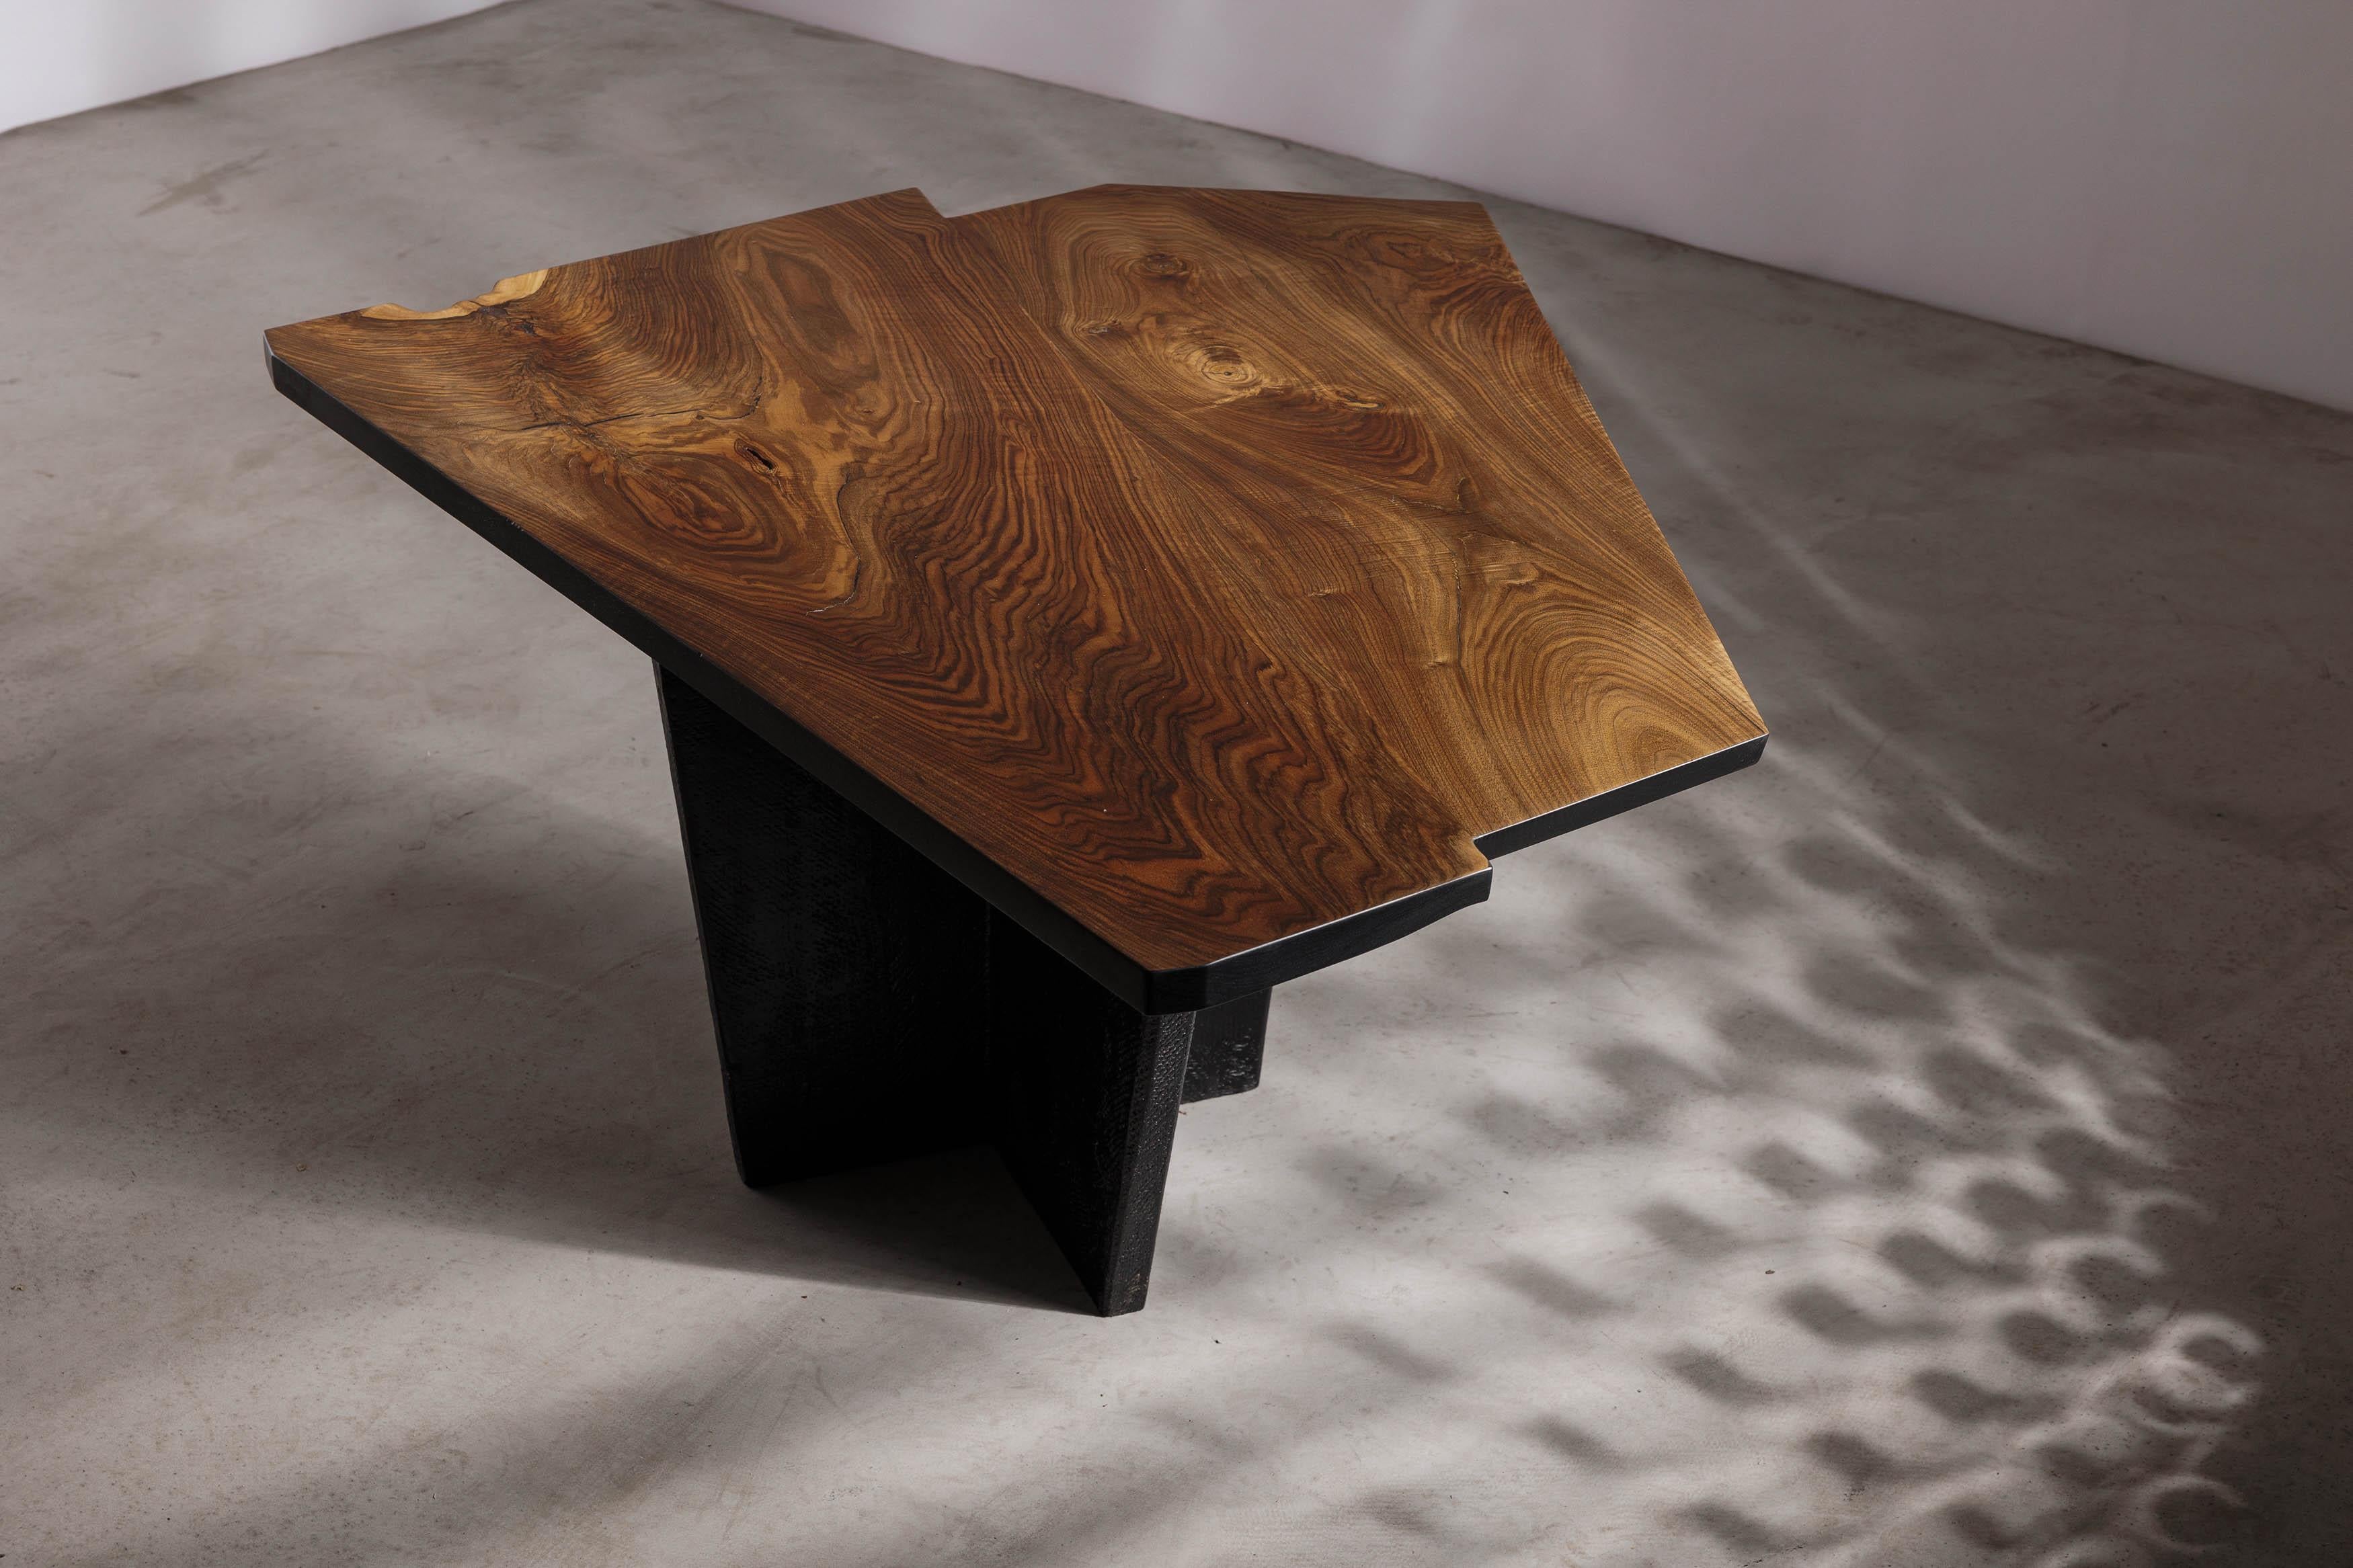 Introducing our stunning smaller dining table from Eero Moss studio's latest collection, designed to embody the beauty of brutalism and organic textures in a minimalist form. Expertly crafted with the finest materials and a keen eye for detail, this